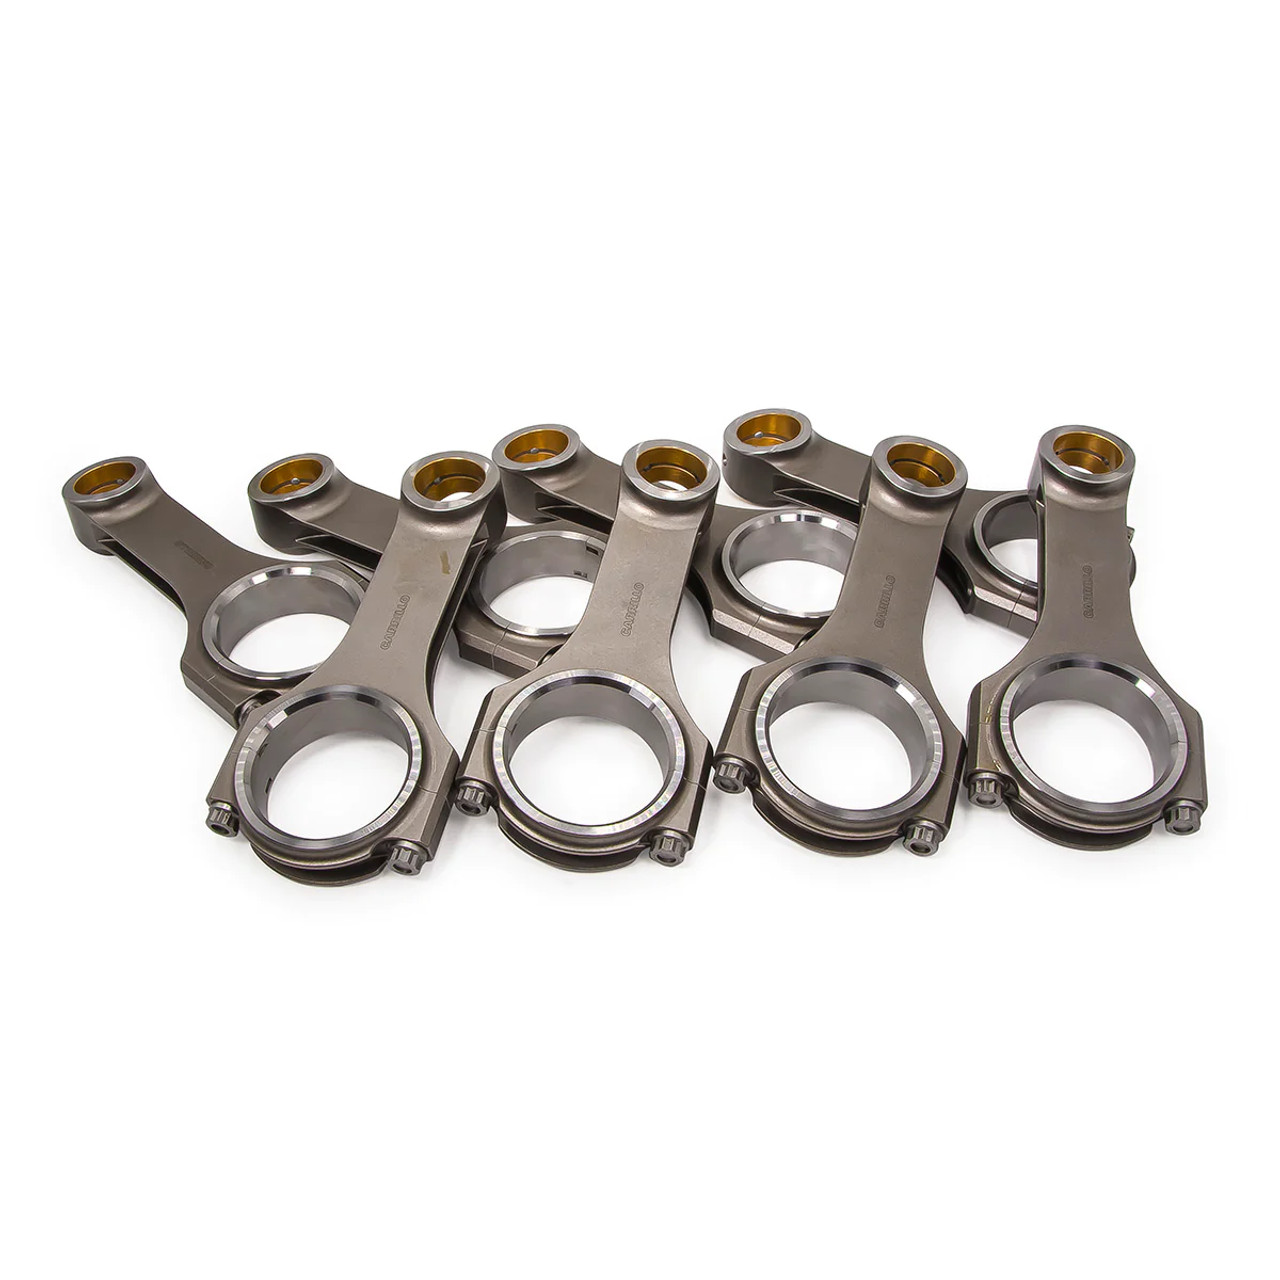 PPE Connecting Rods for 2001 to 2010 6.6L Duramax (118030800)Main VIew